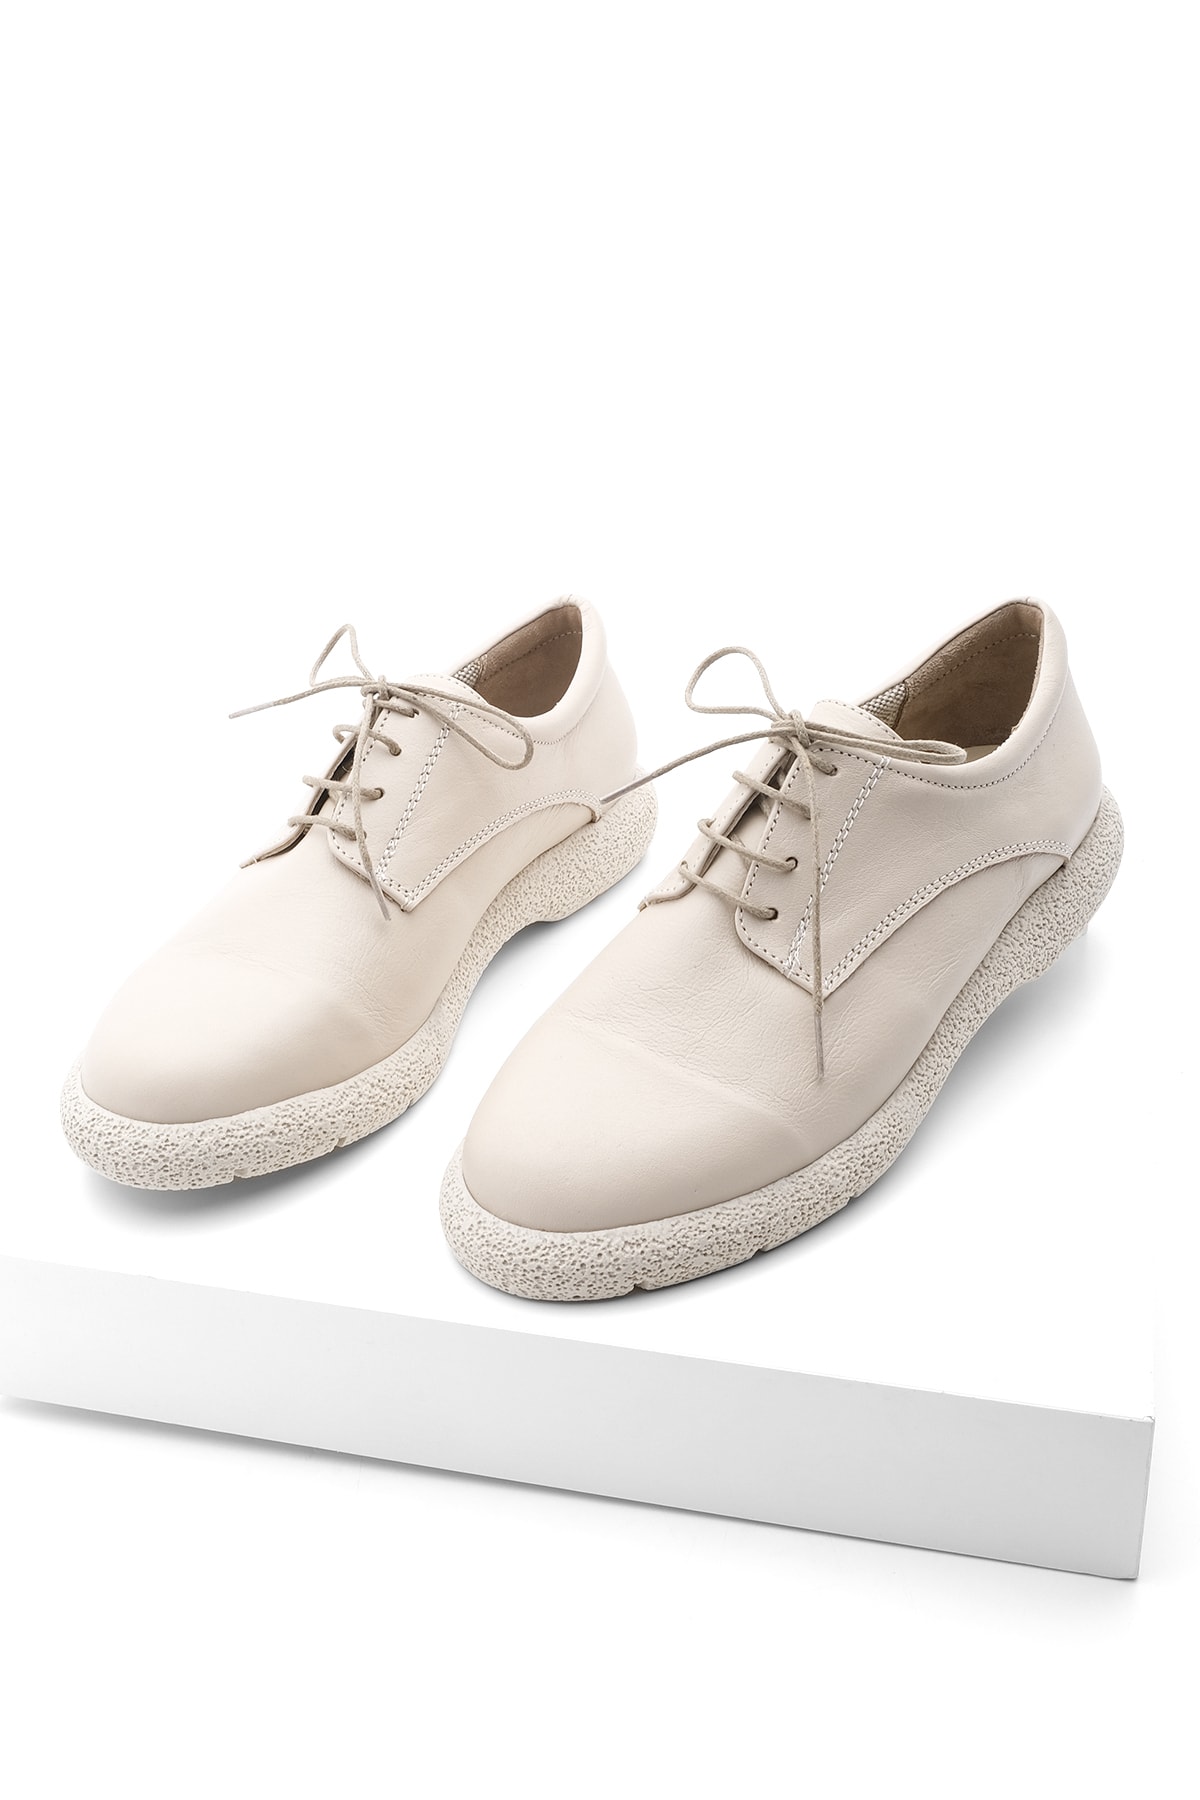 Marjin Women's Genuine Leather Oxford Shoes with Lace-up Casual Shoes, Allen Ring Beige.